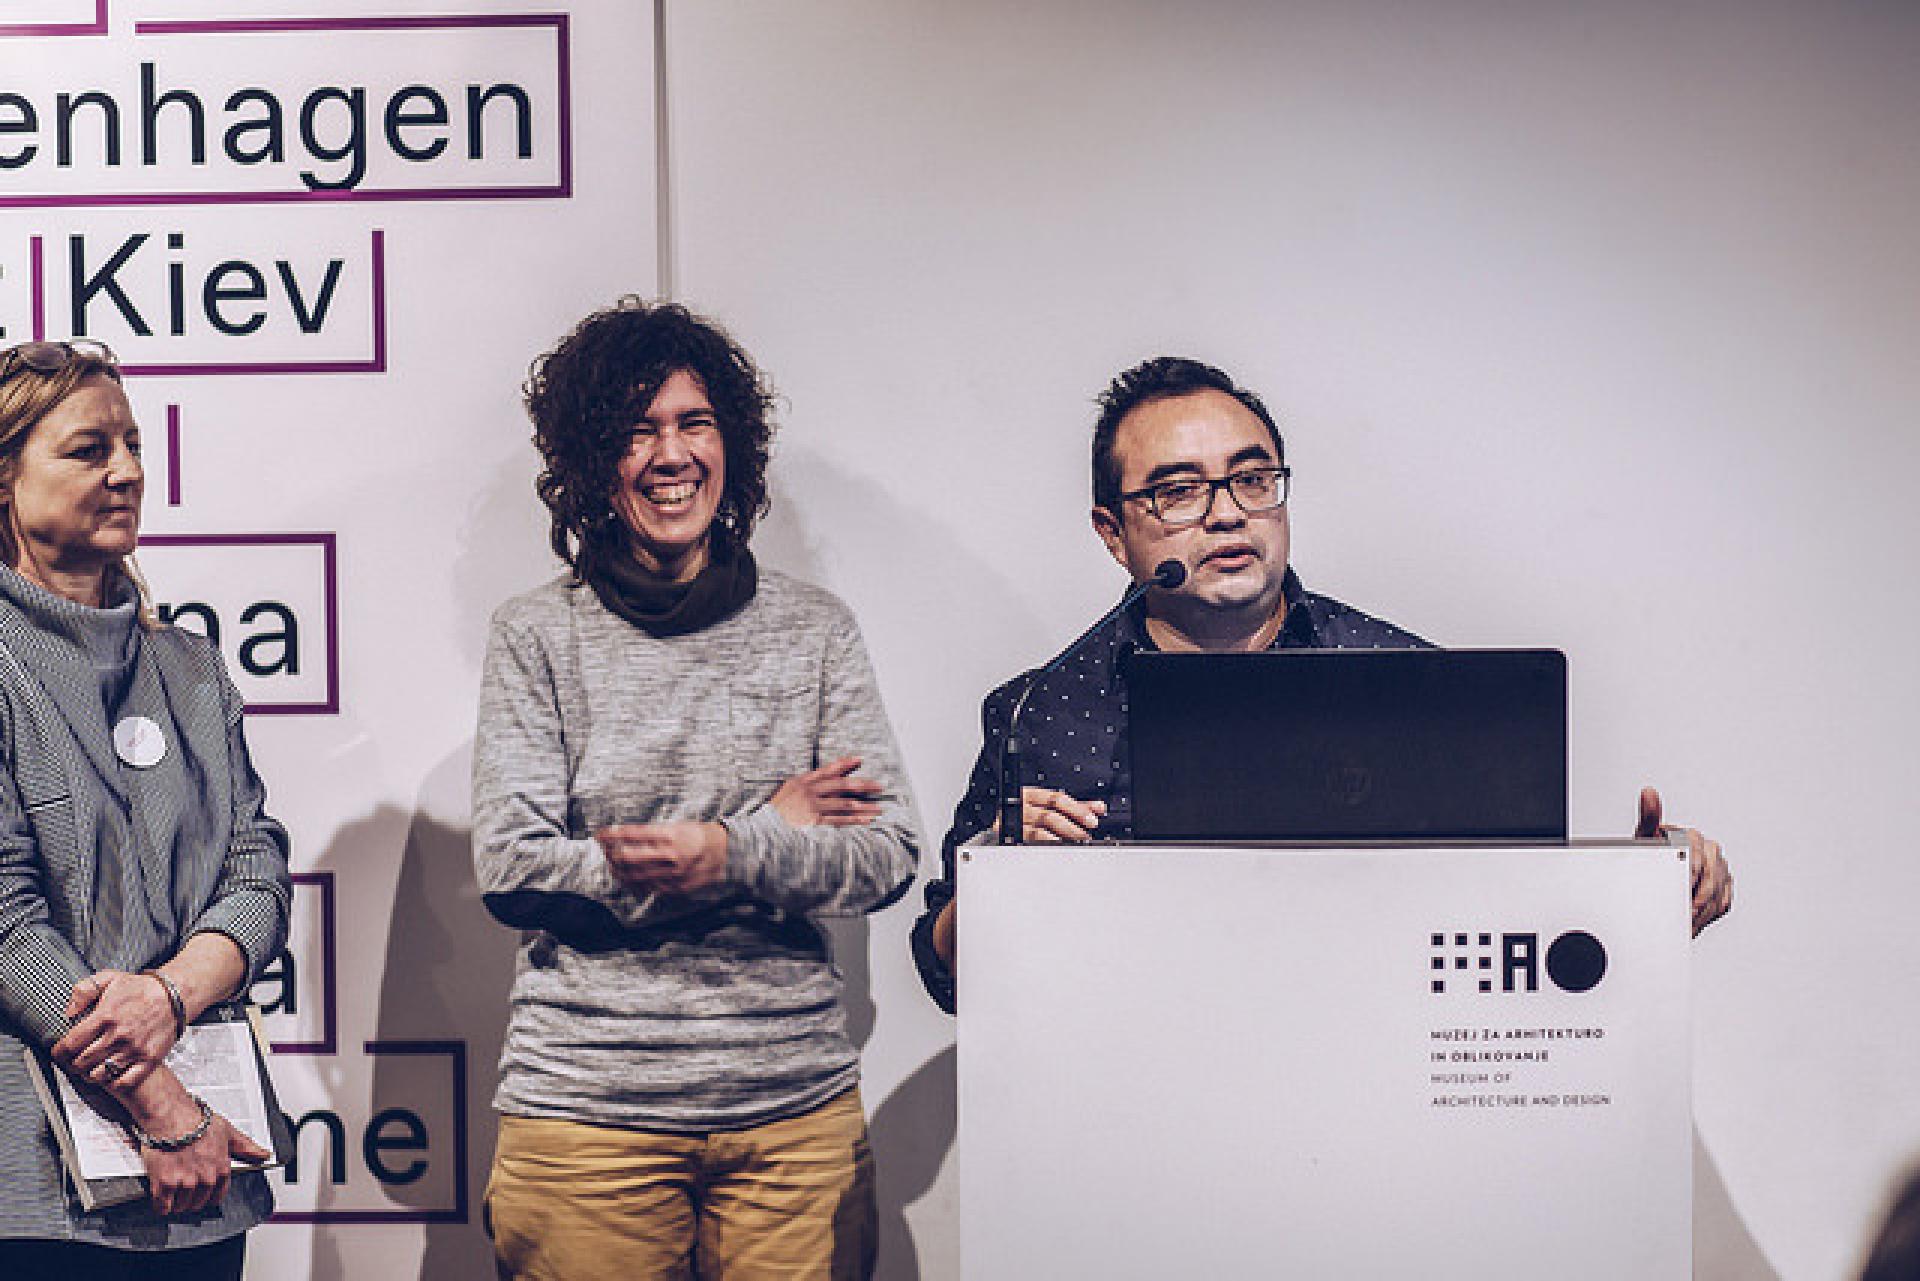 Publish with priniting books or online is the main question for the architecture publishers now days (Sophie Lovell from &beyond, Ethel Baraona and Cesar Reyes from dpr-barcelona) | Photo by Peter Giodani